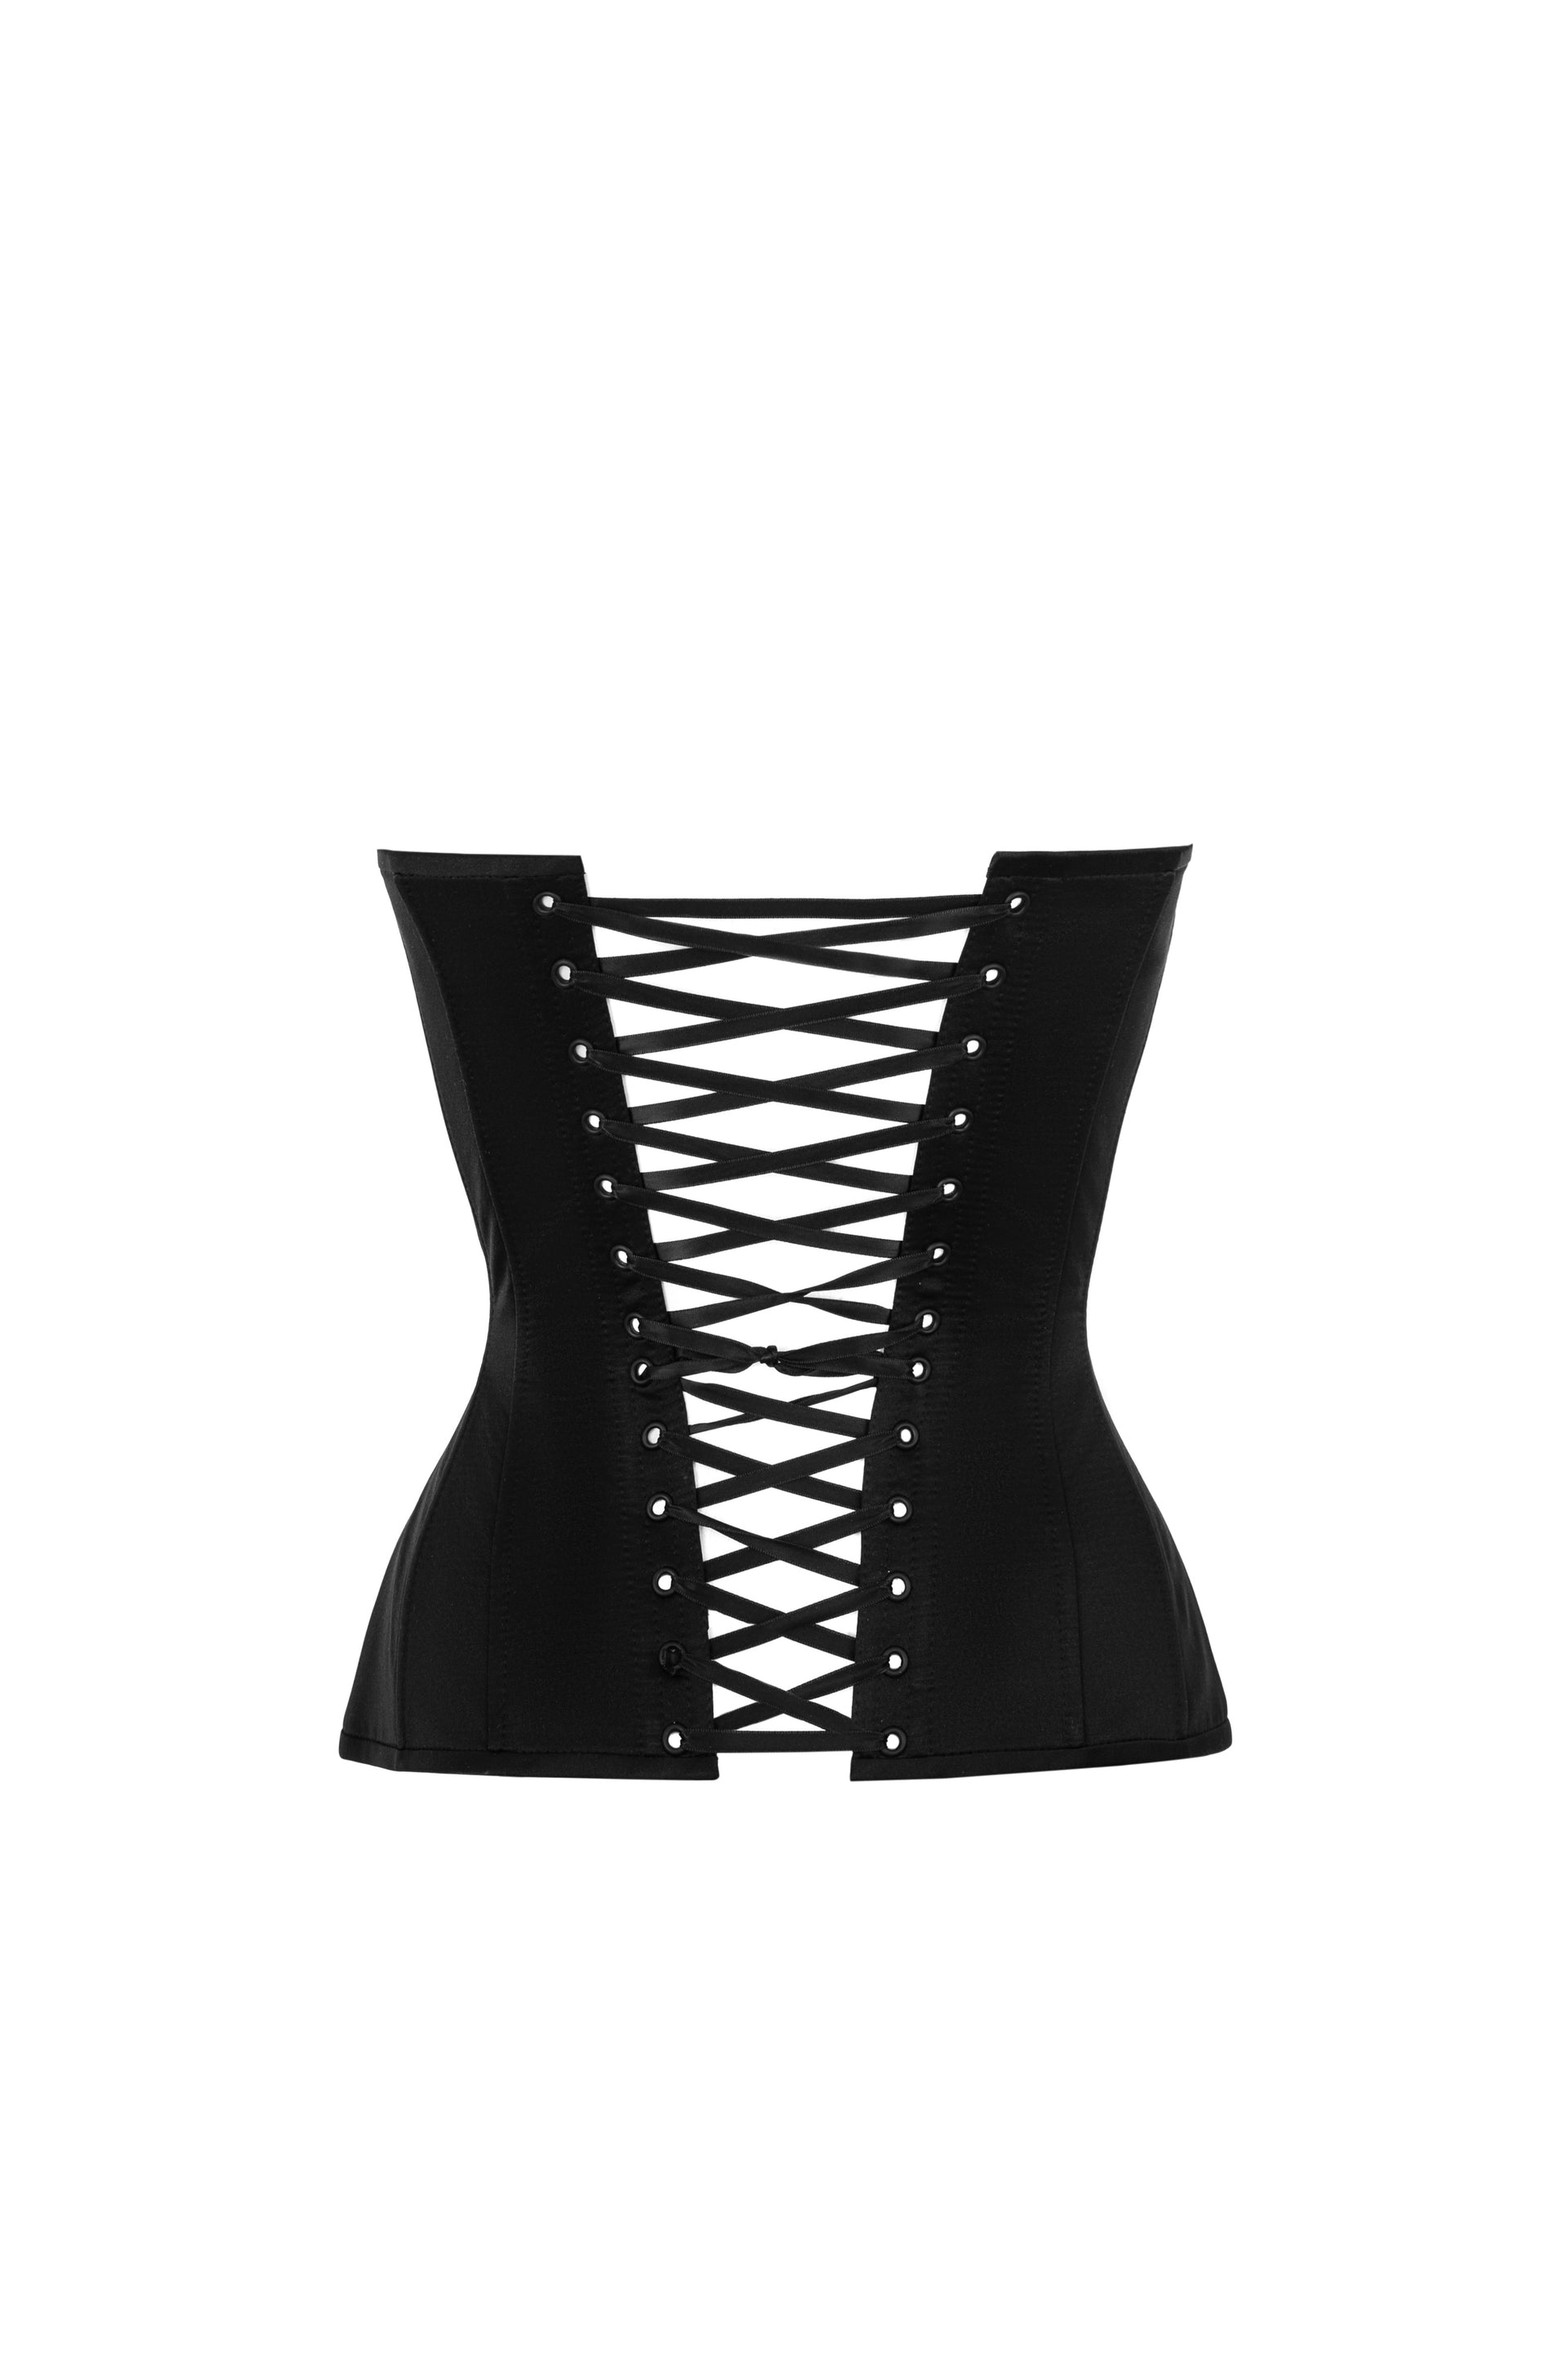 Lace black corset with cups